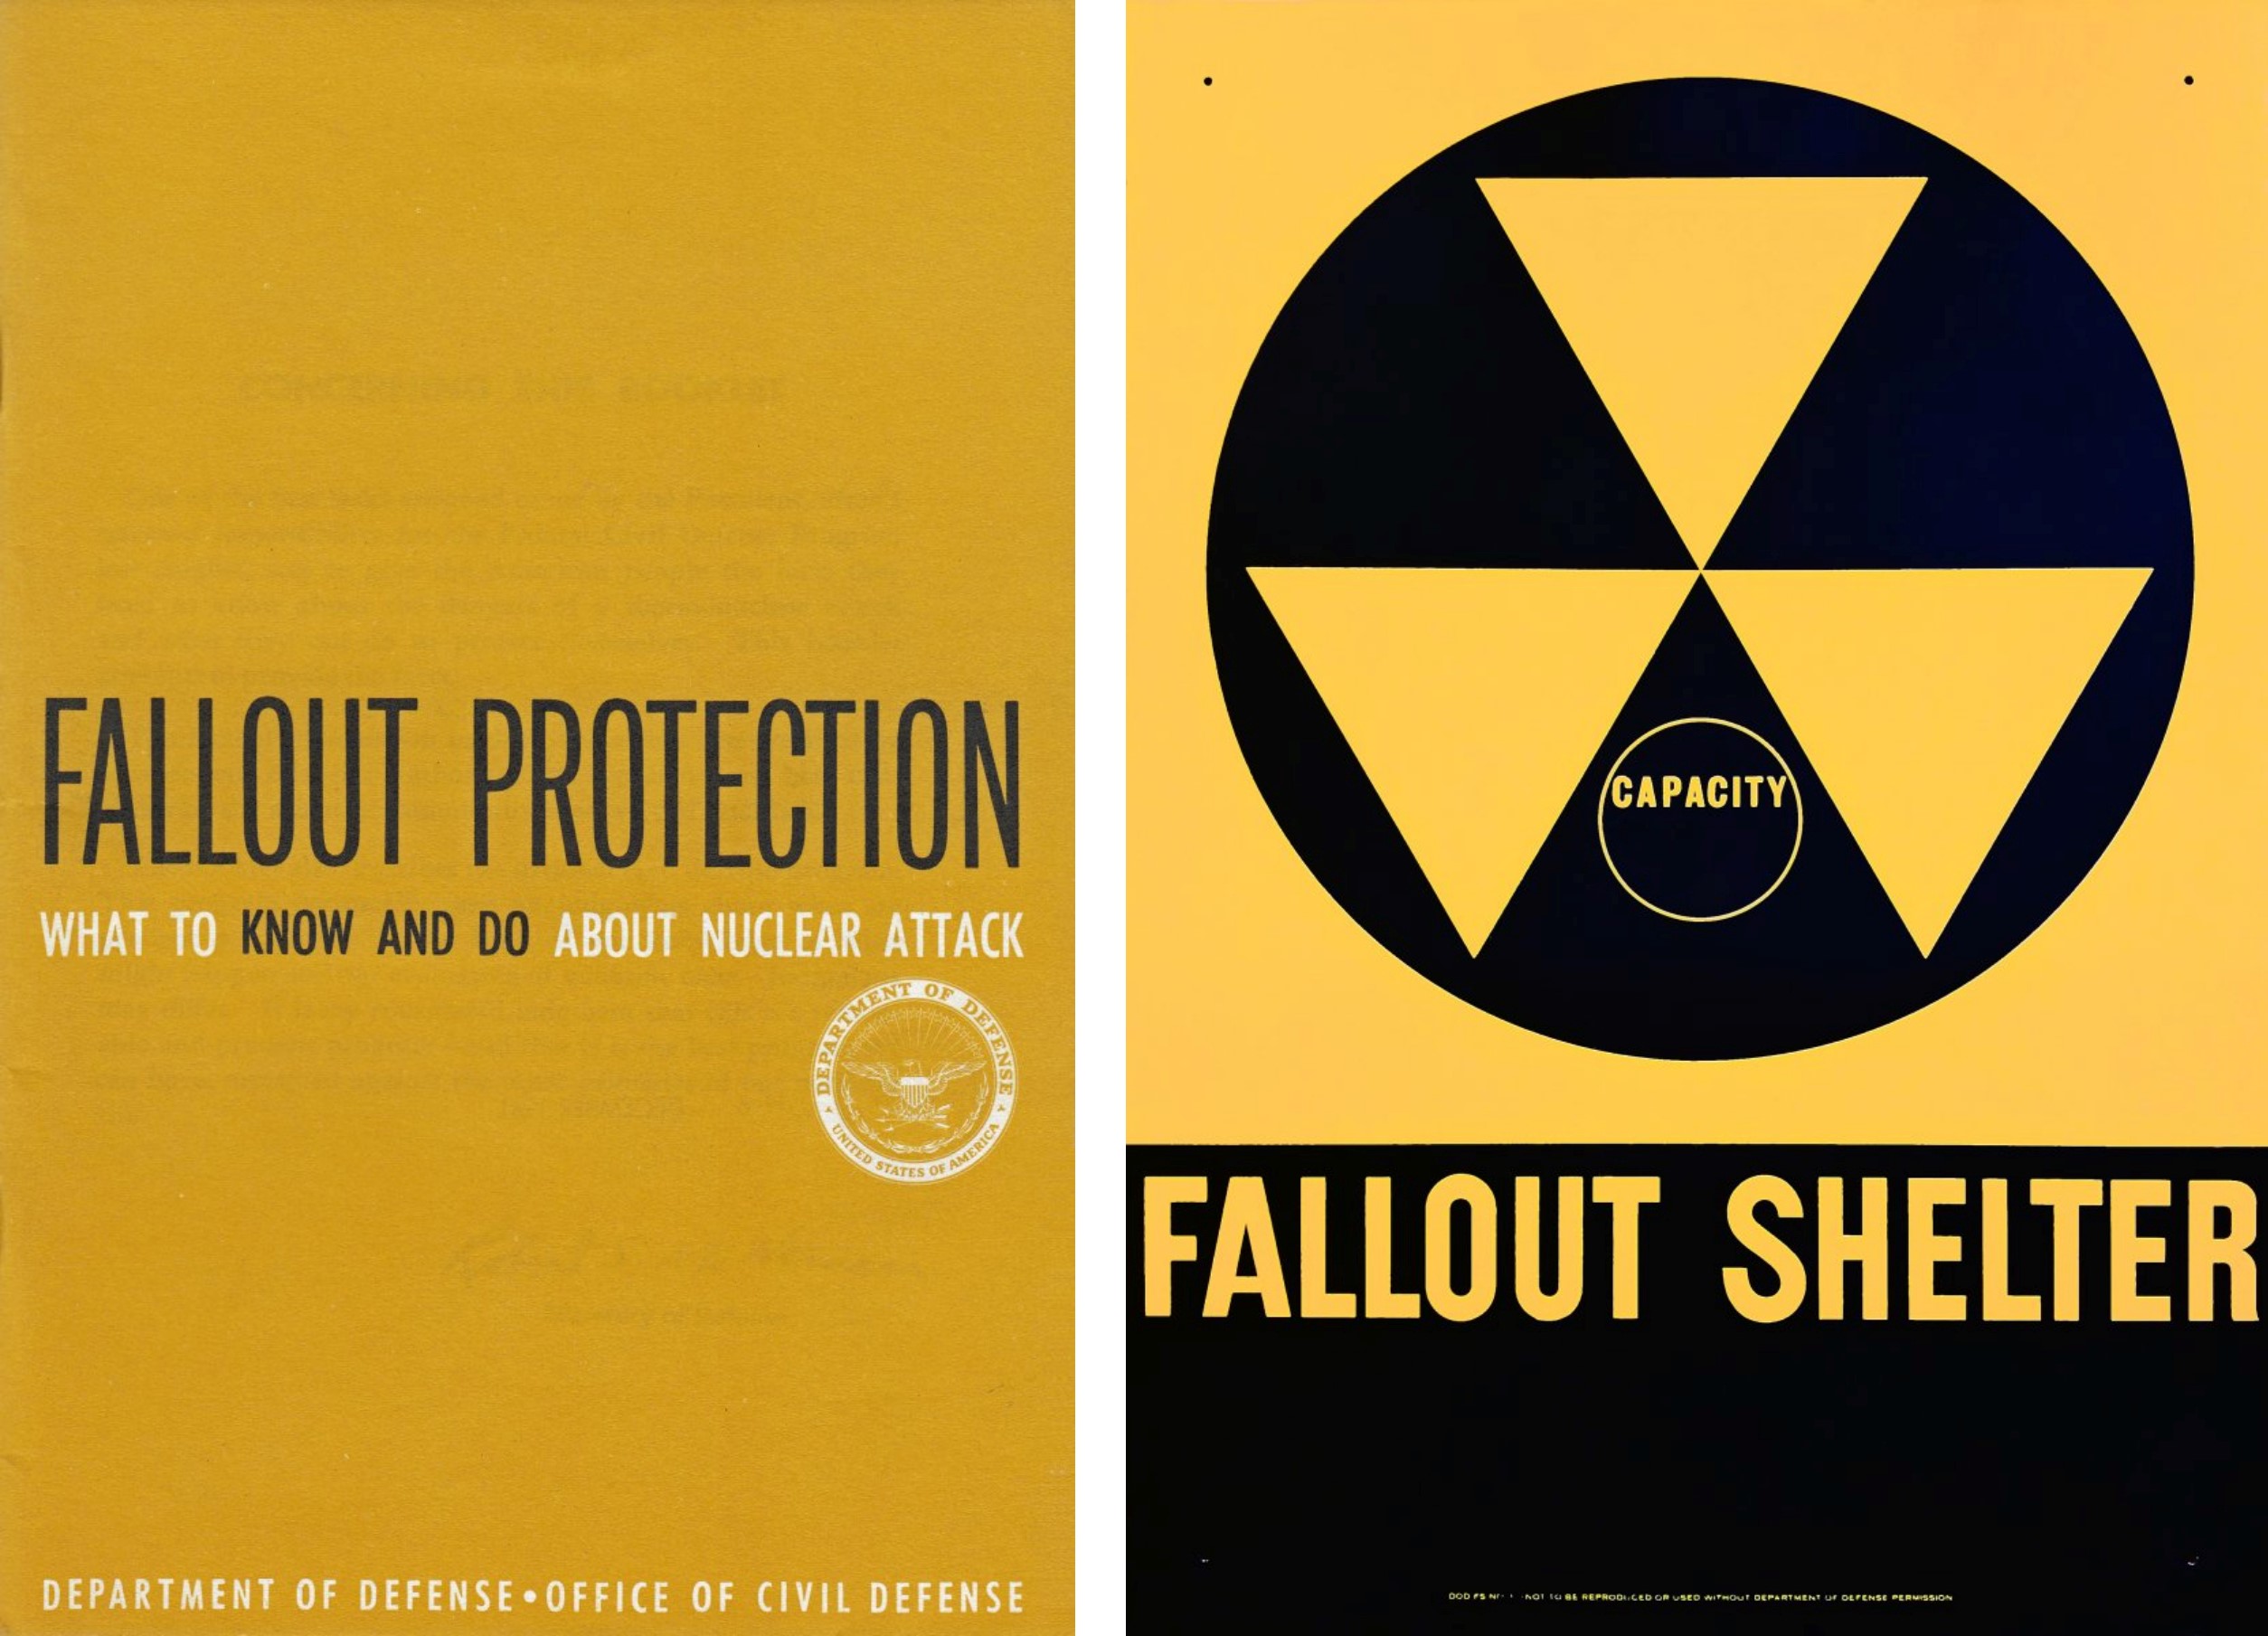 On the left, cover of the booklet, Fallout Protection: What to Know and Do About Nuclear Attack. On the right, a picture of a National Fallout Shelter Survey sign.